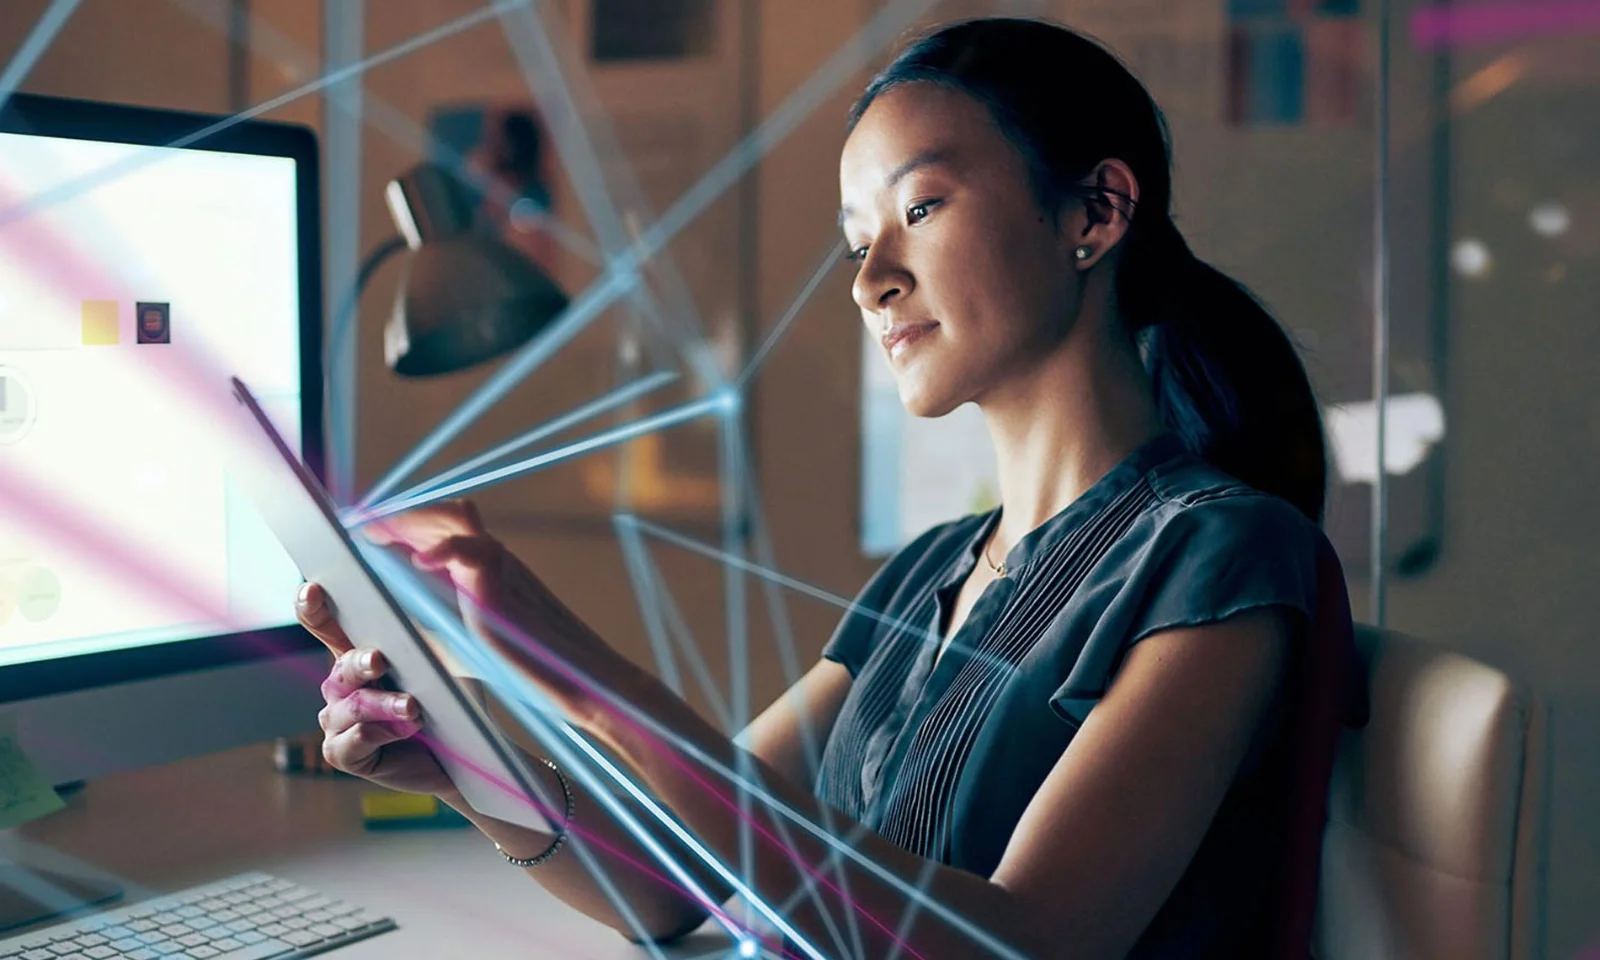 The image showcases a woman intently using a tablet in a sophisticated digital workspace, with multiple digital connections and data points illustrated around her. A computer monitor and office desk setup are visible in the background, emphasizing the integration of advanced technology in capital markets. The environment is bathed in cool tones, highlighting the data-driven and analytical nature of the capital markets sector. This visual represents the dynamic and interconnected world of capital markets, where technology and data play a pivotal role in decision-making and operations.